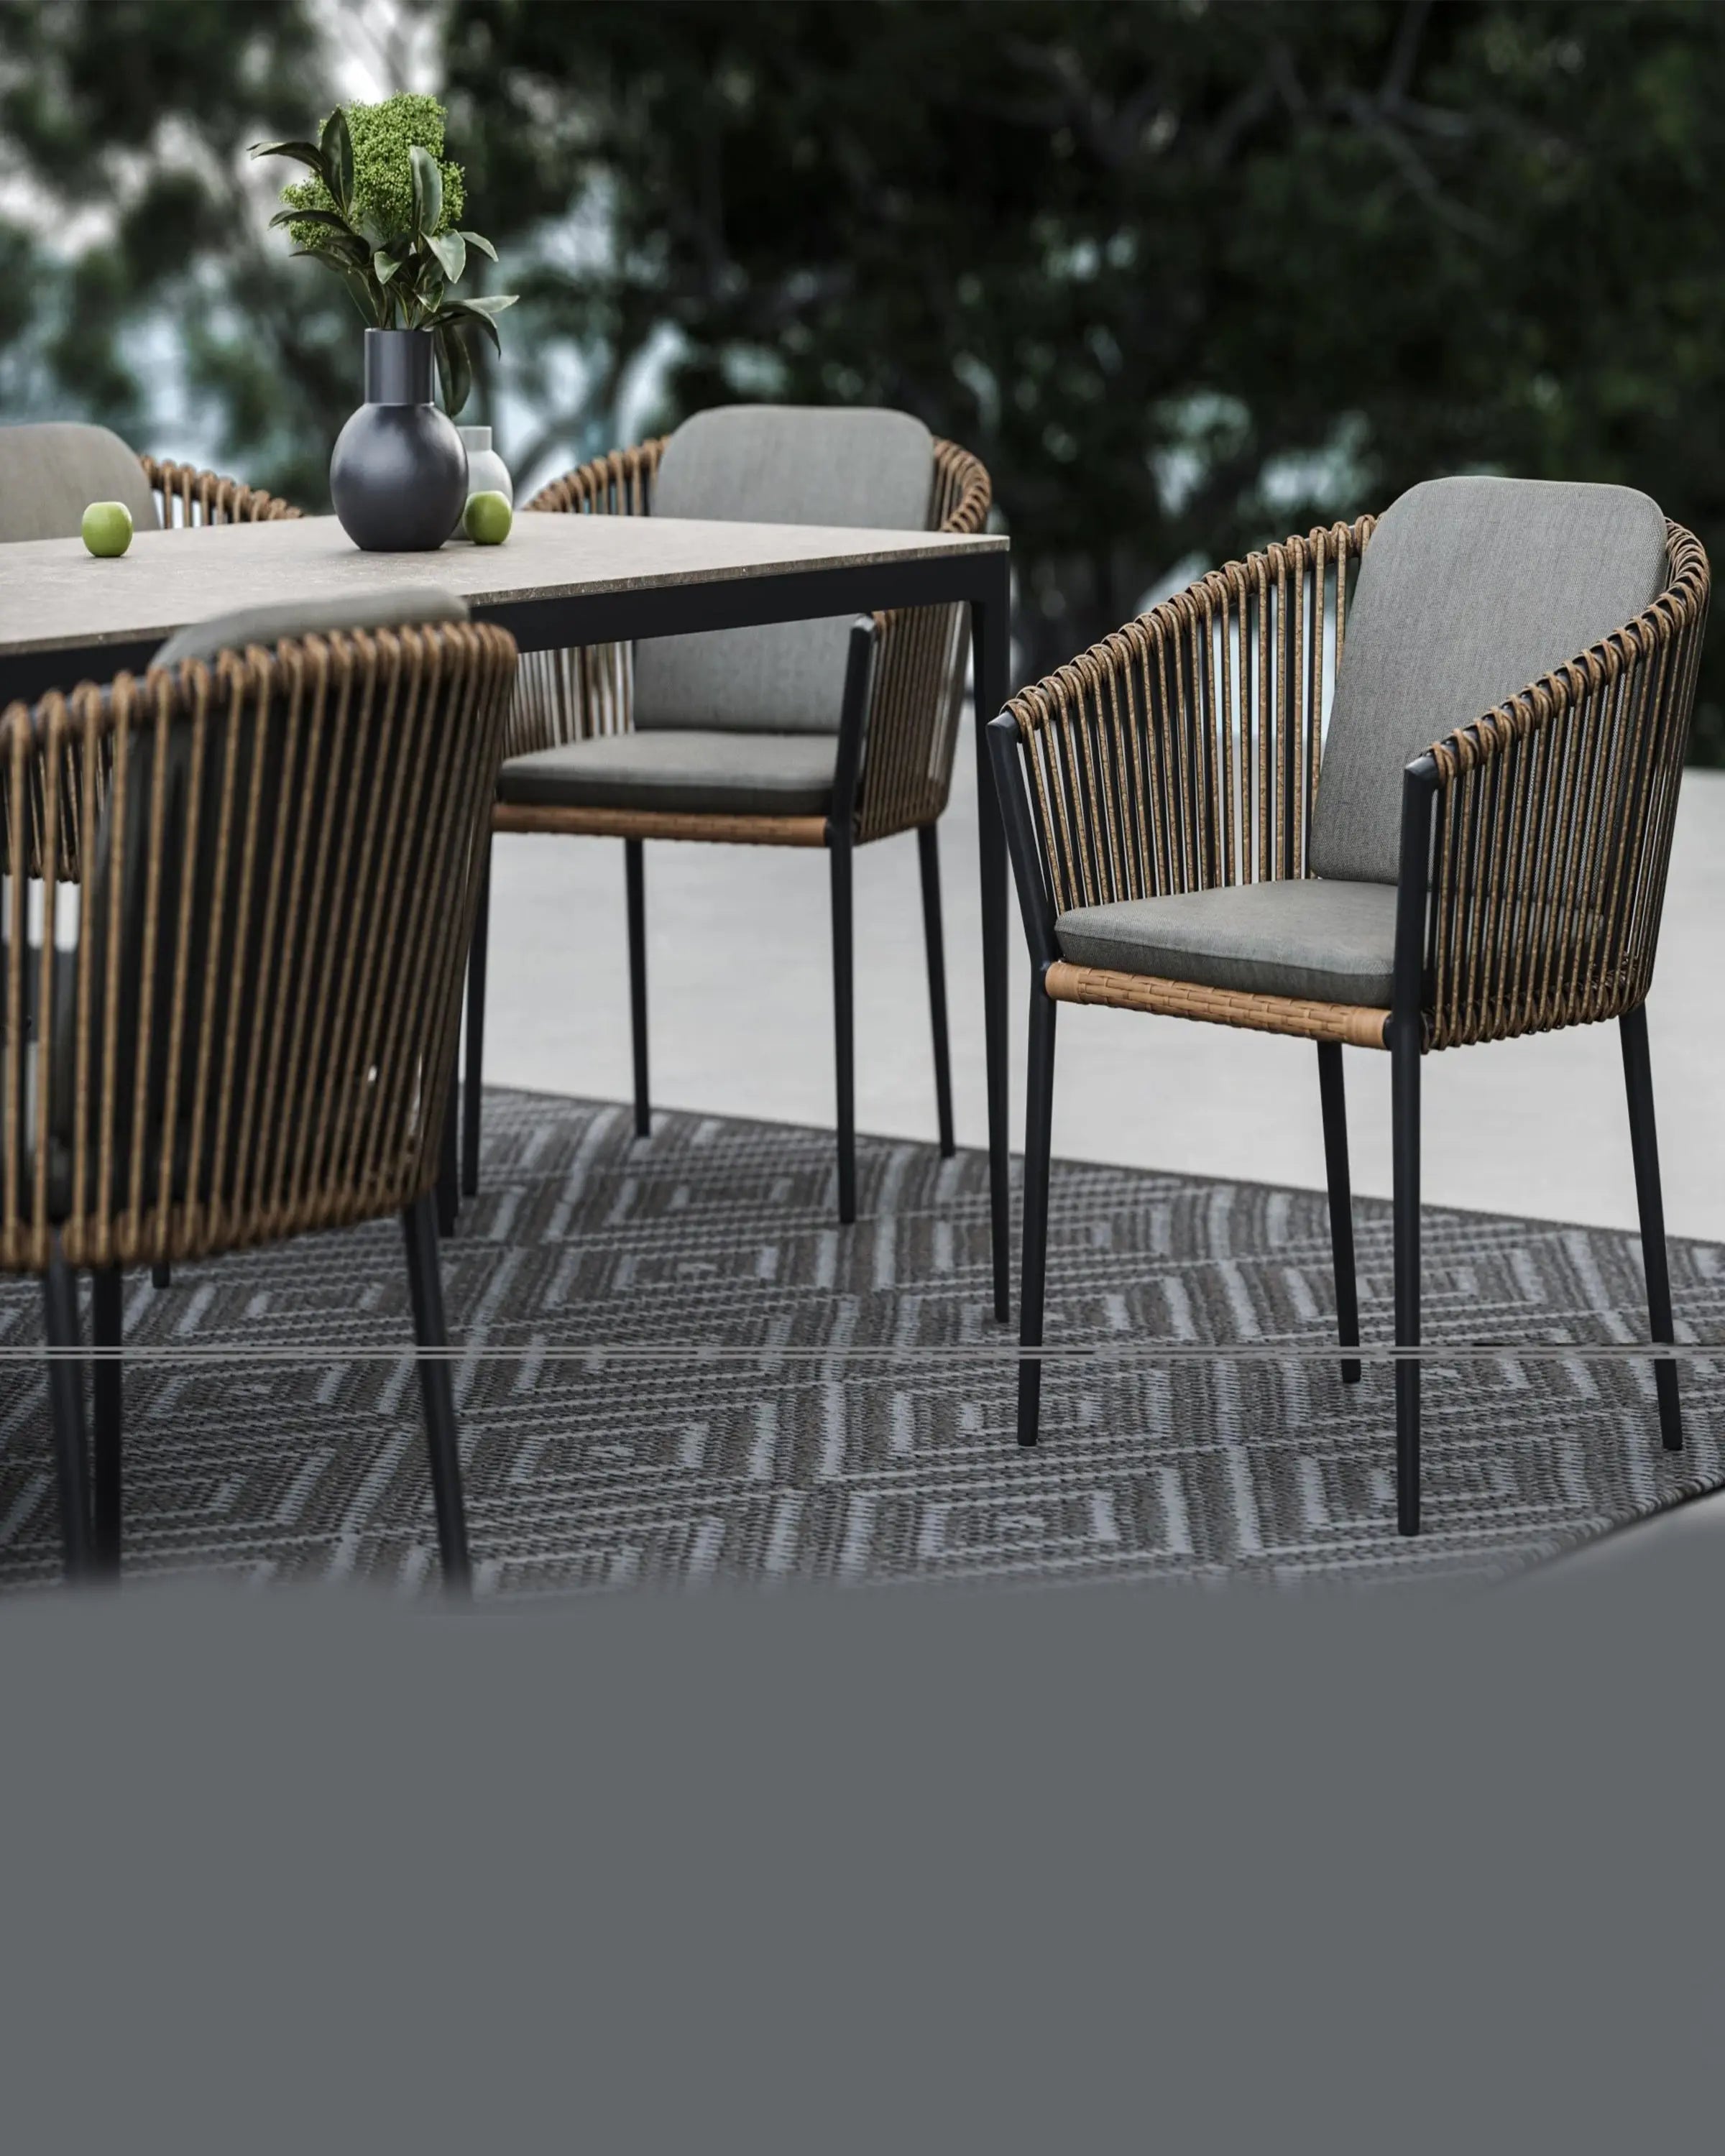 Kula Dining Table - Out Door Furniture